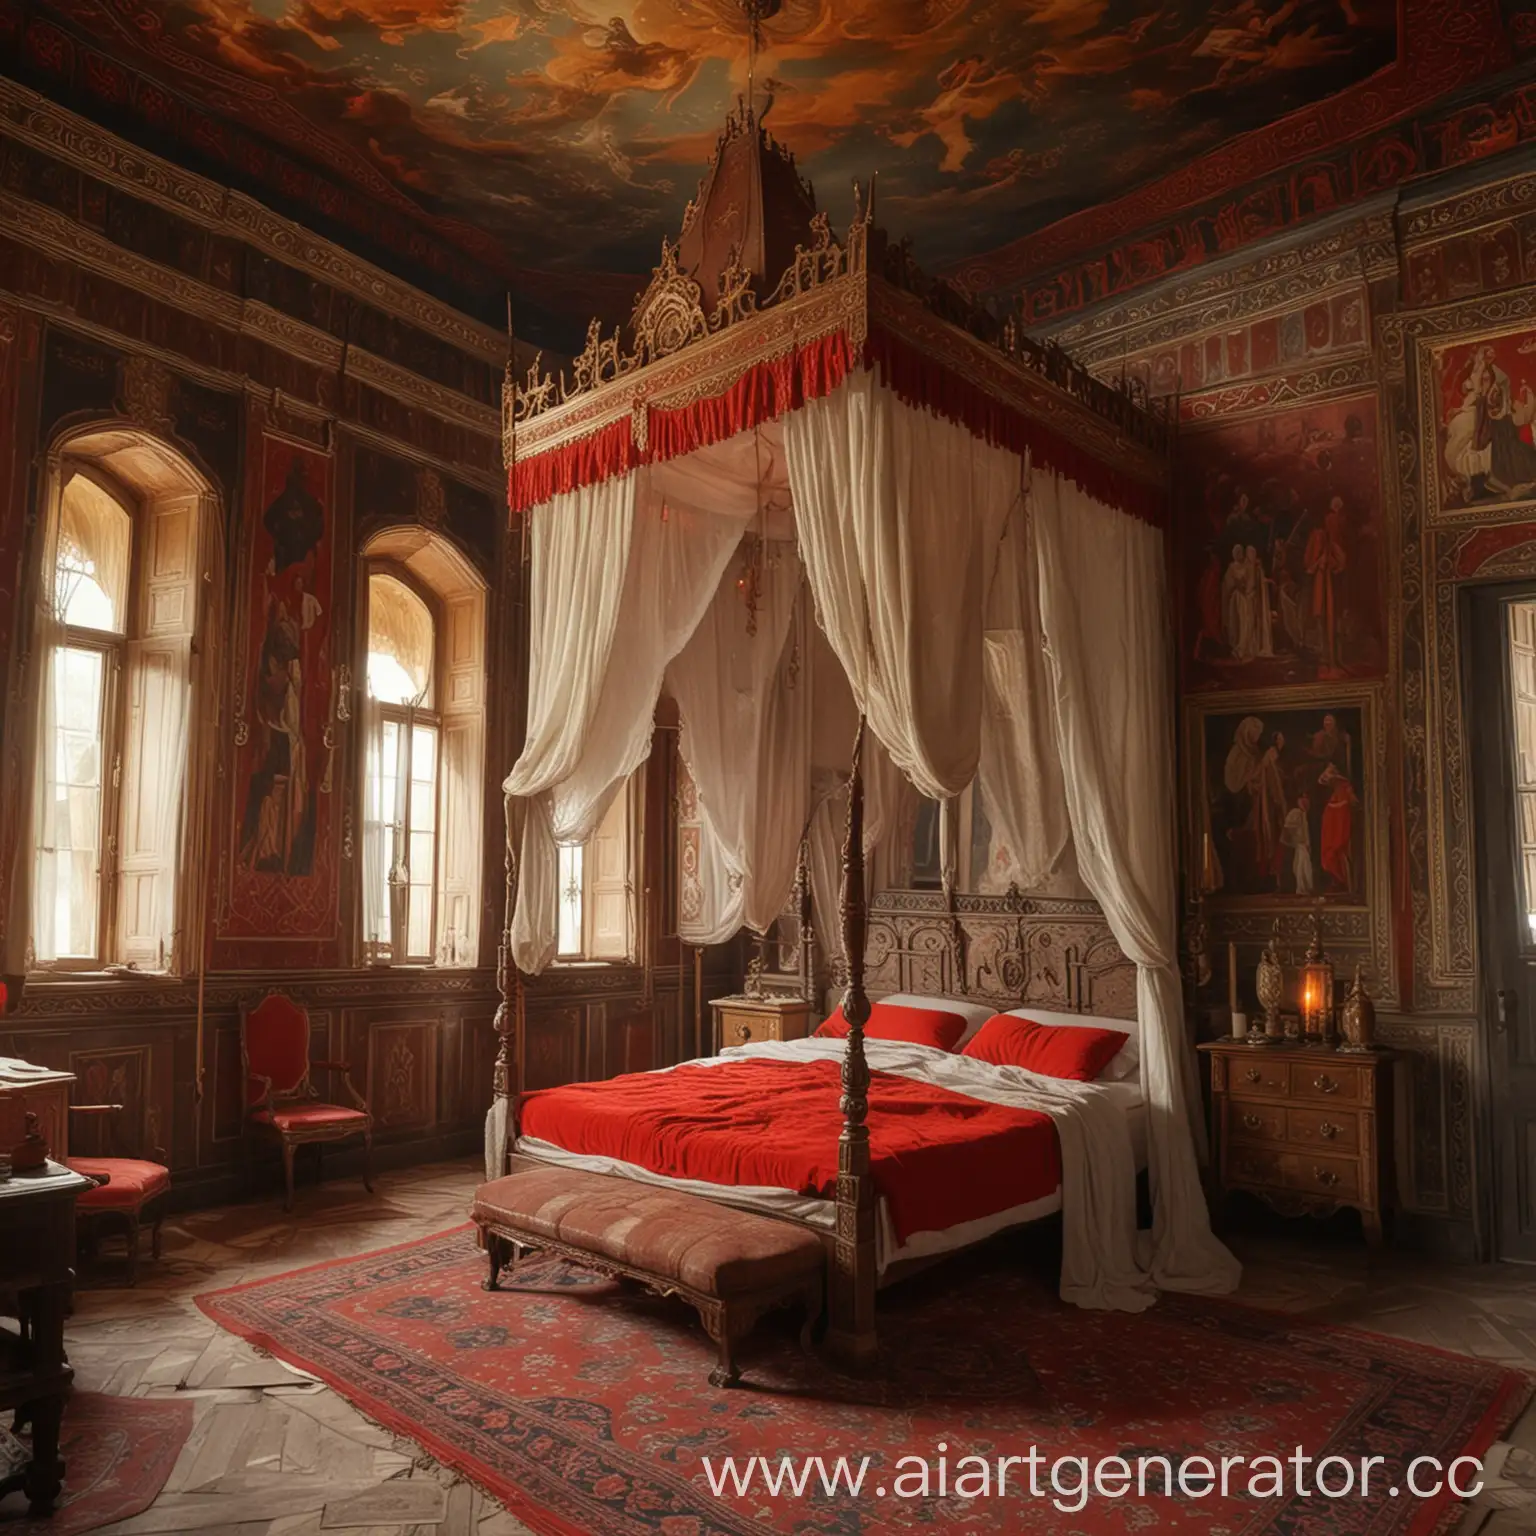 ancient Rus', mansion, princes' chambers, old Russian prince, bedroom, painting on the walls, red chambers, painting, hokhlopa on the walls, ligature on the walls, torches, candlesticks, bed, canopy, room, fairytale palace, ancient Russian fairy tales, folklore, HD, 4k, scattering of rays, candles, tower palace of the 9th century BC, old palace, hut, low ceilings, antiques, times of Vladimir the Red Sun, 9th century, century of the baptism of Rus', boyar chambers,